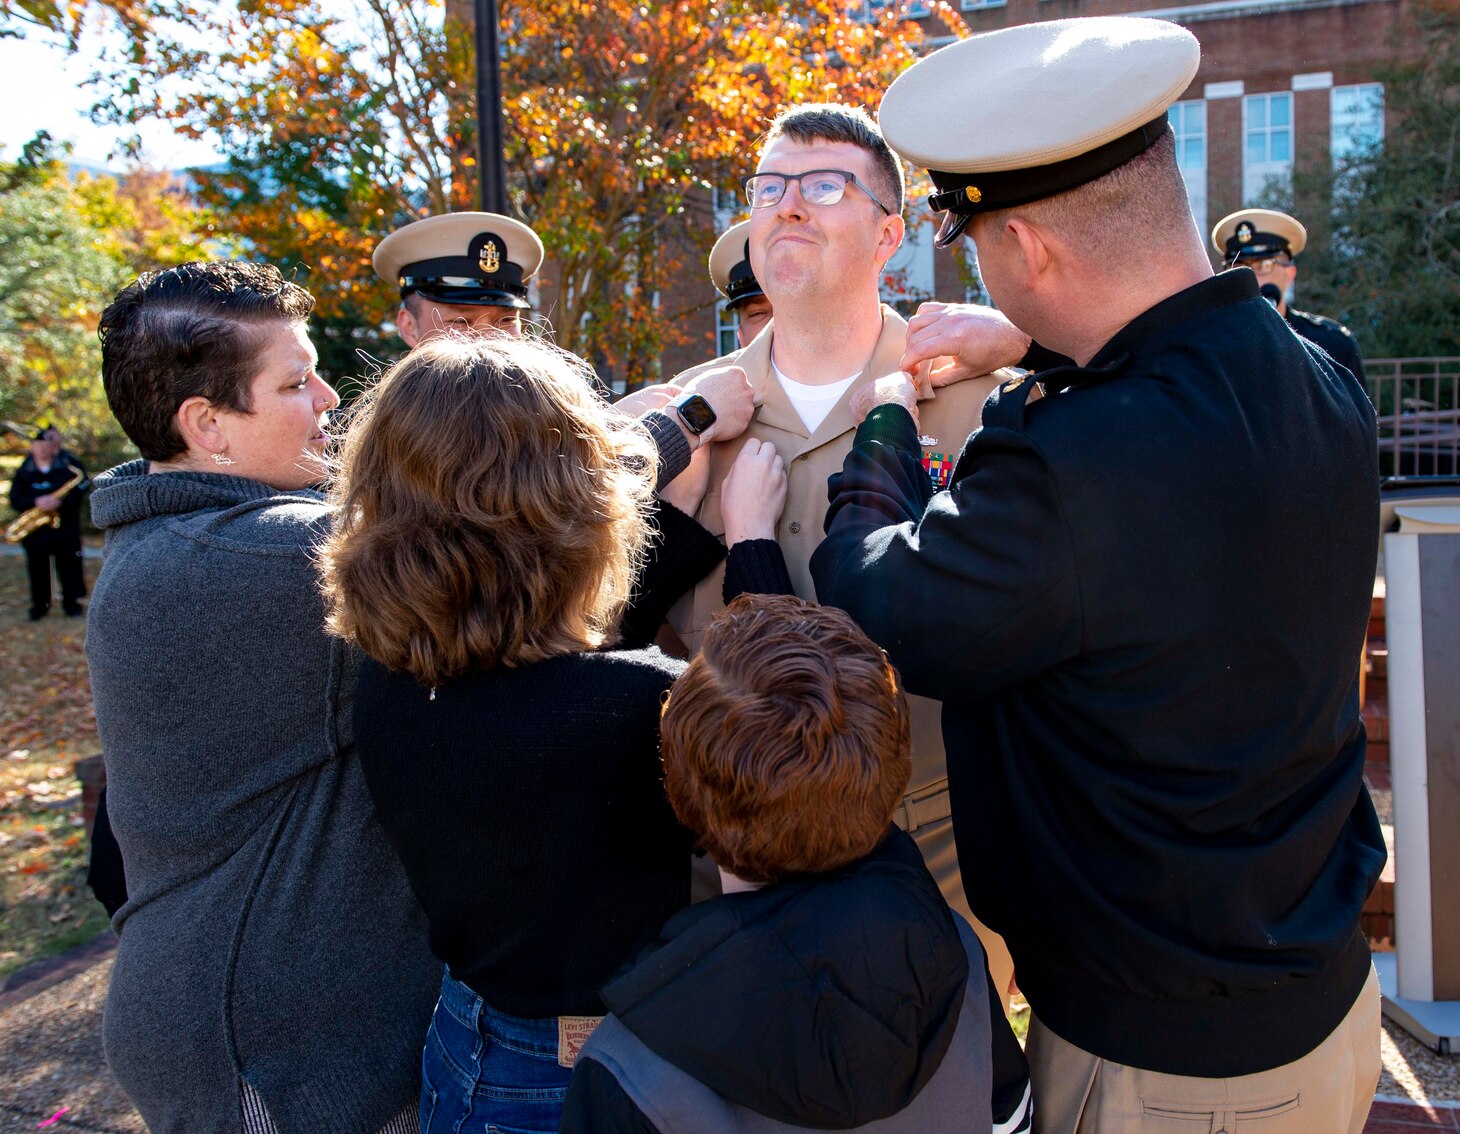 Chief Mass Communication Specialist Gary Johnson is overcome with emotion as his family and mentor pin on his anchors during the chief petty officer pinning ceremony at POW/MIA Park, Nov. 19, 2021.